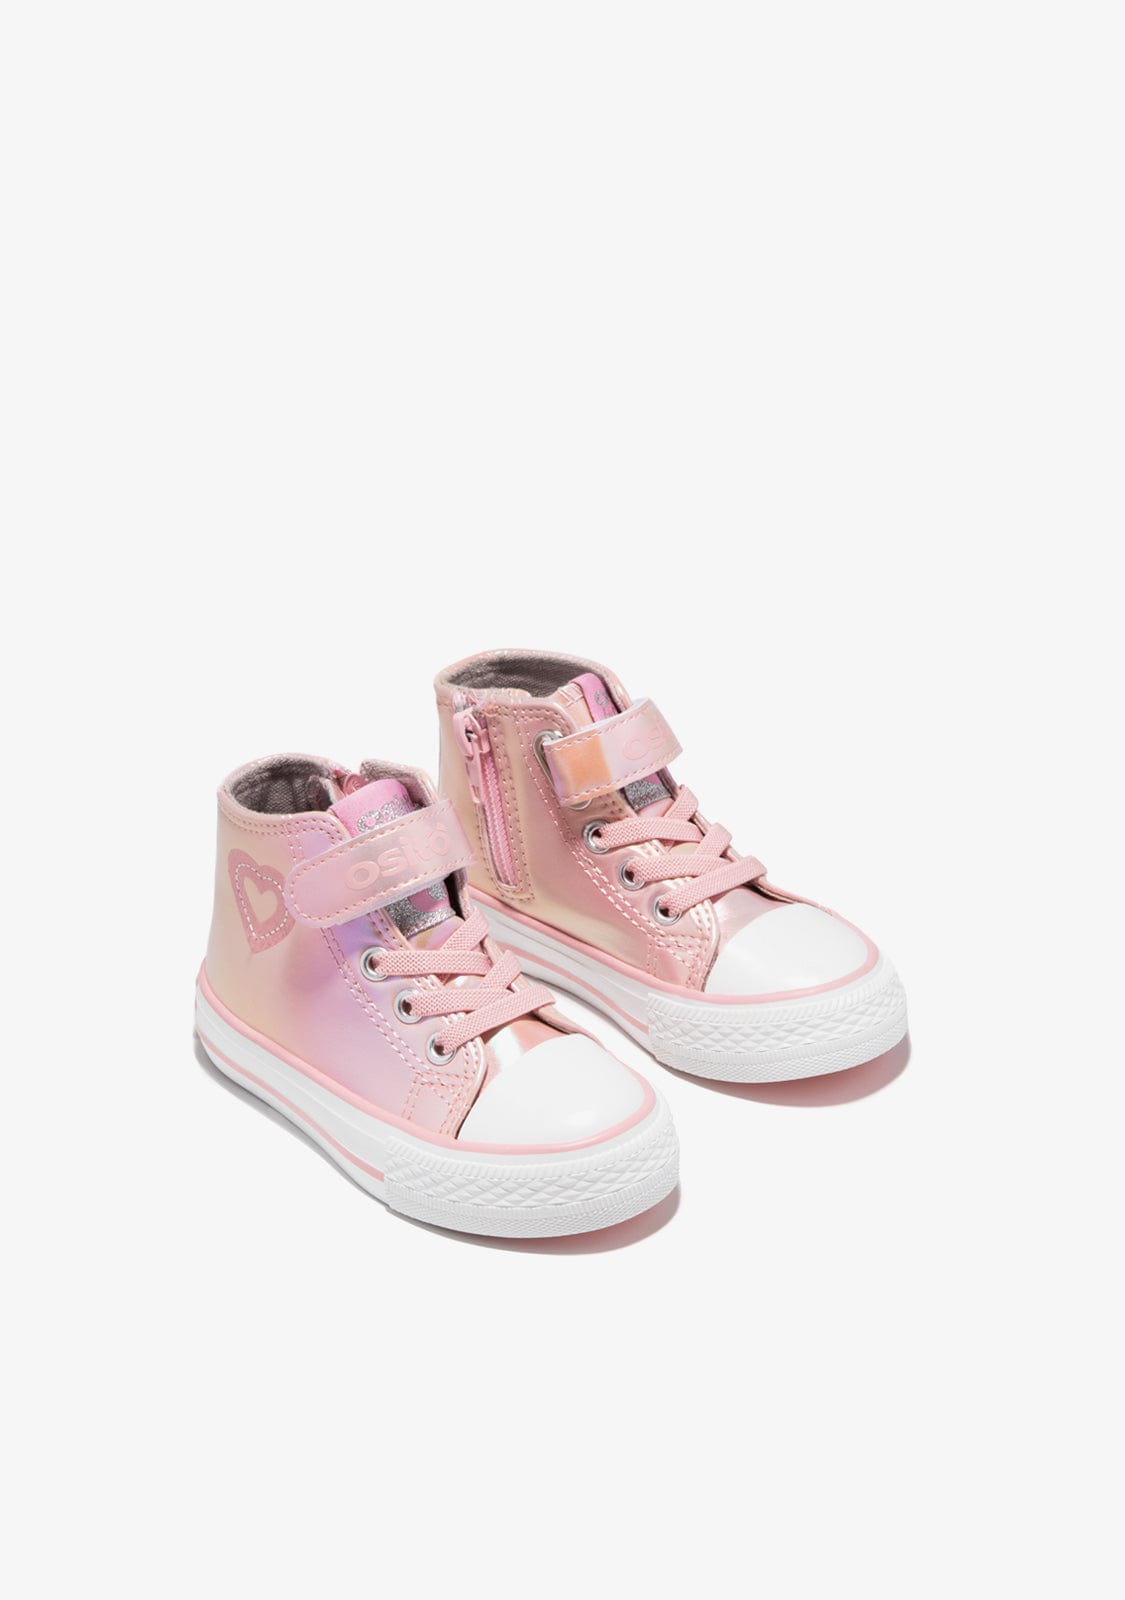 OSITO Shoes Baby's Pink Patent Leather Heart Hi-Top Sneakers